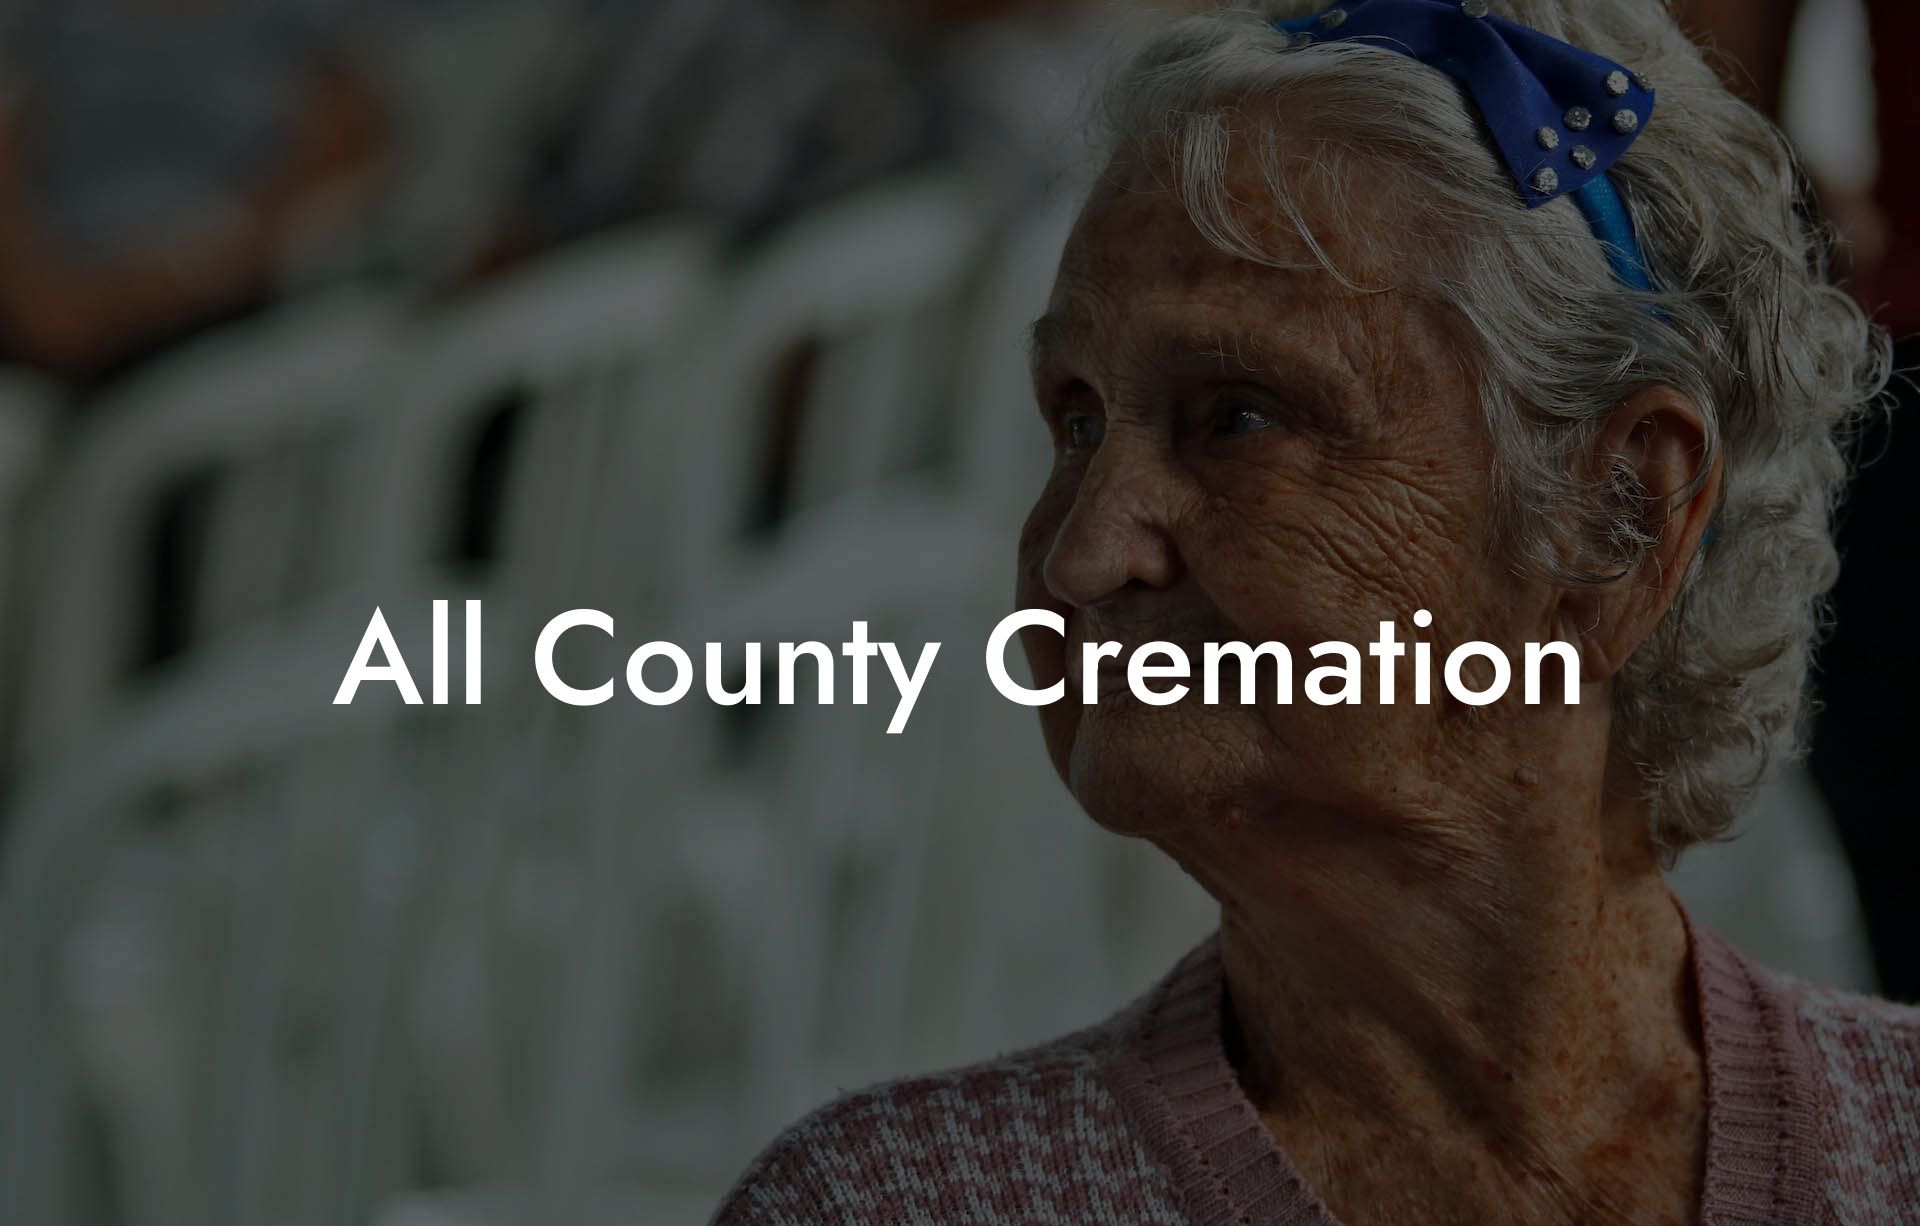 All County Cremation